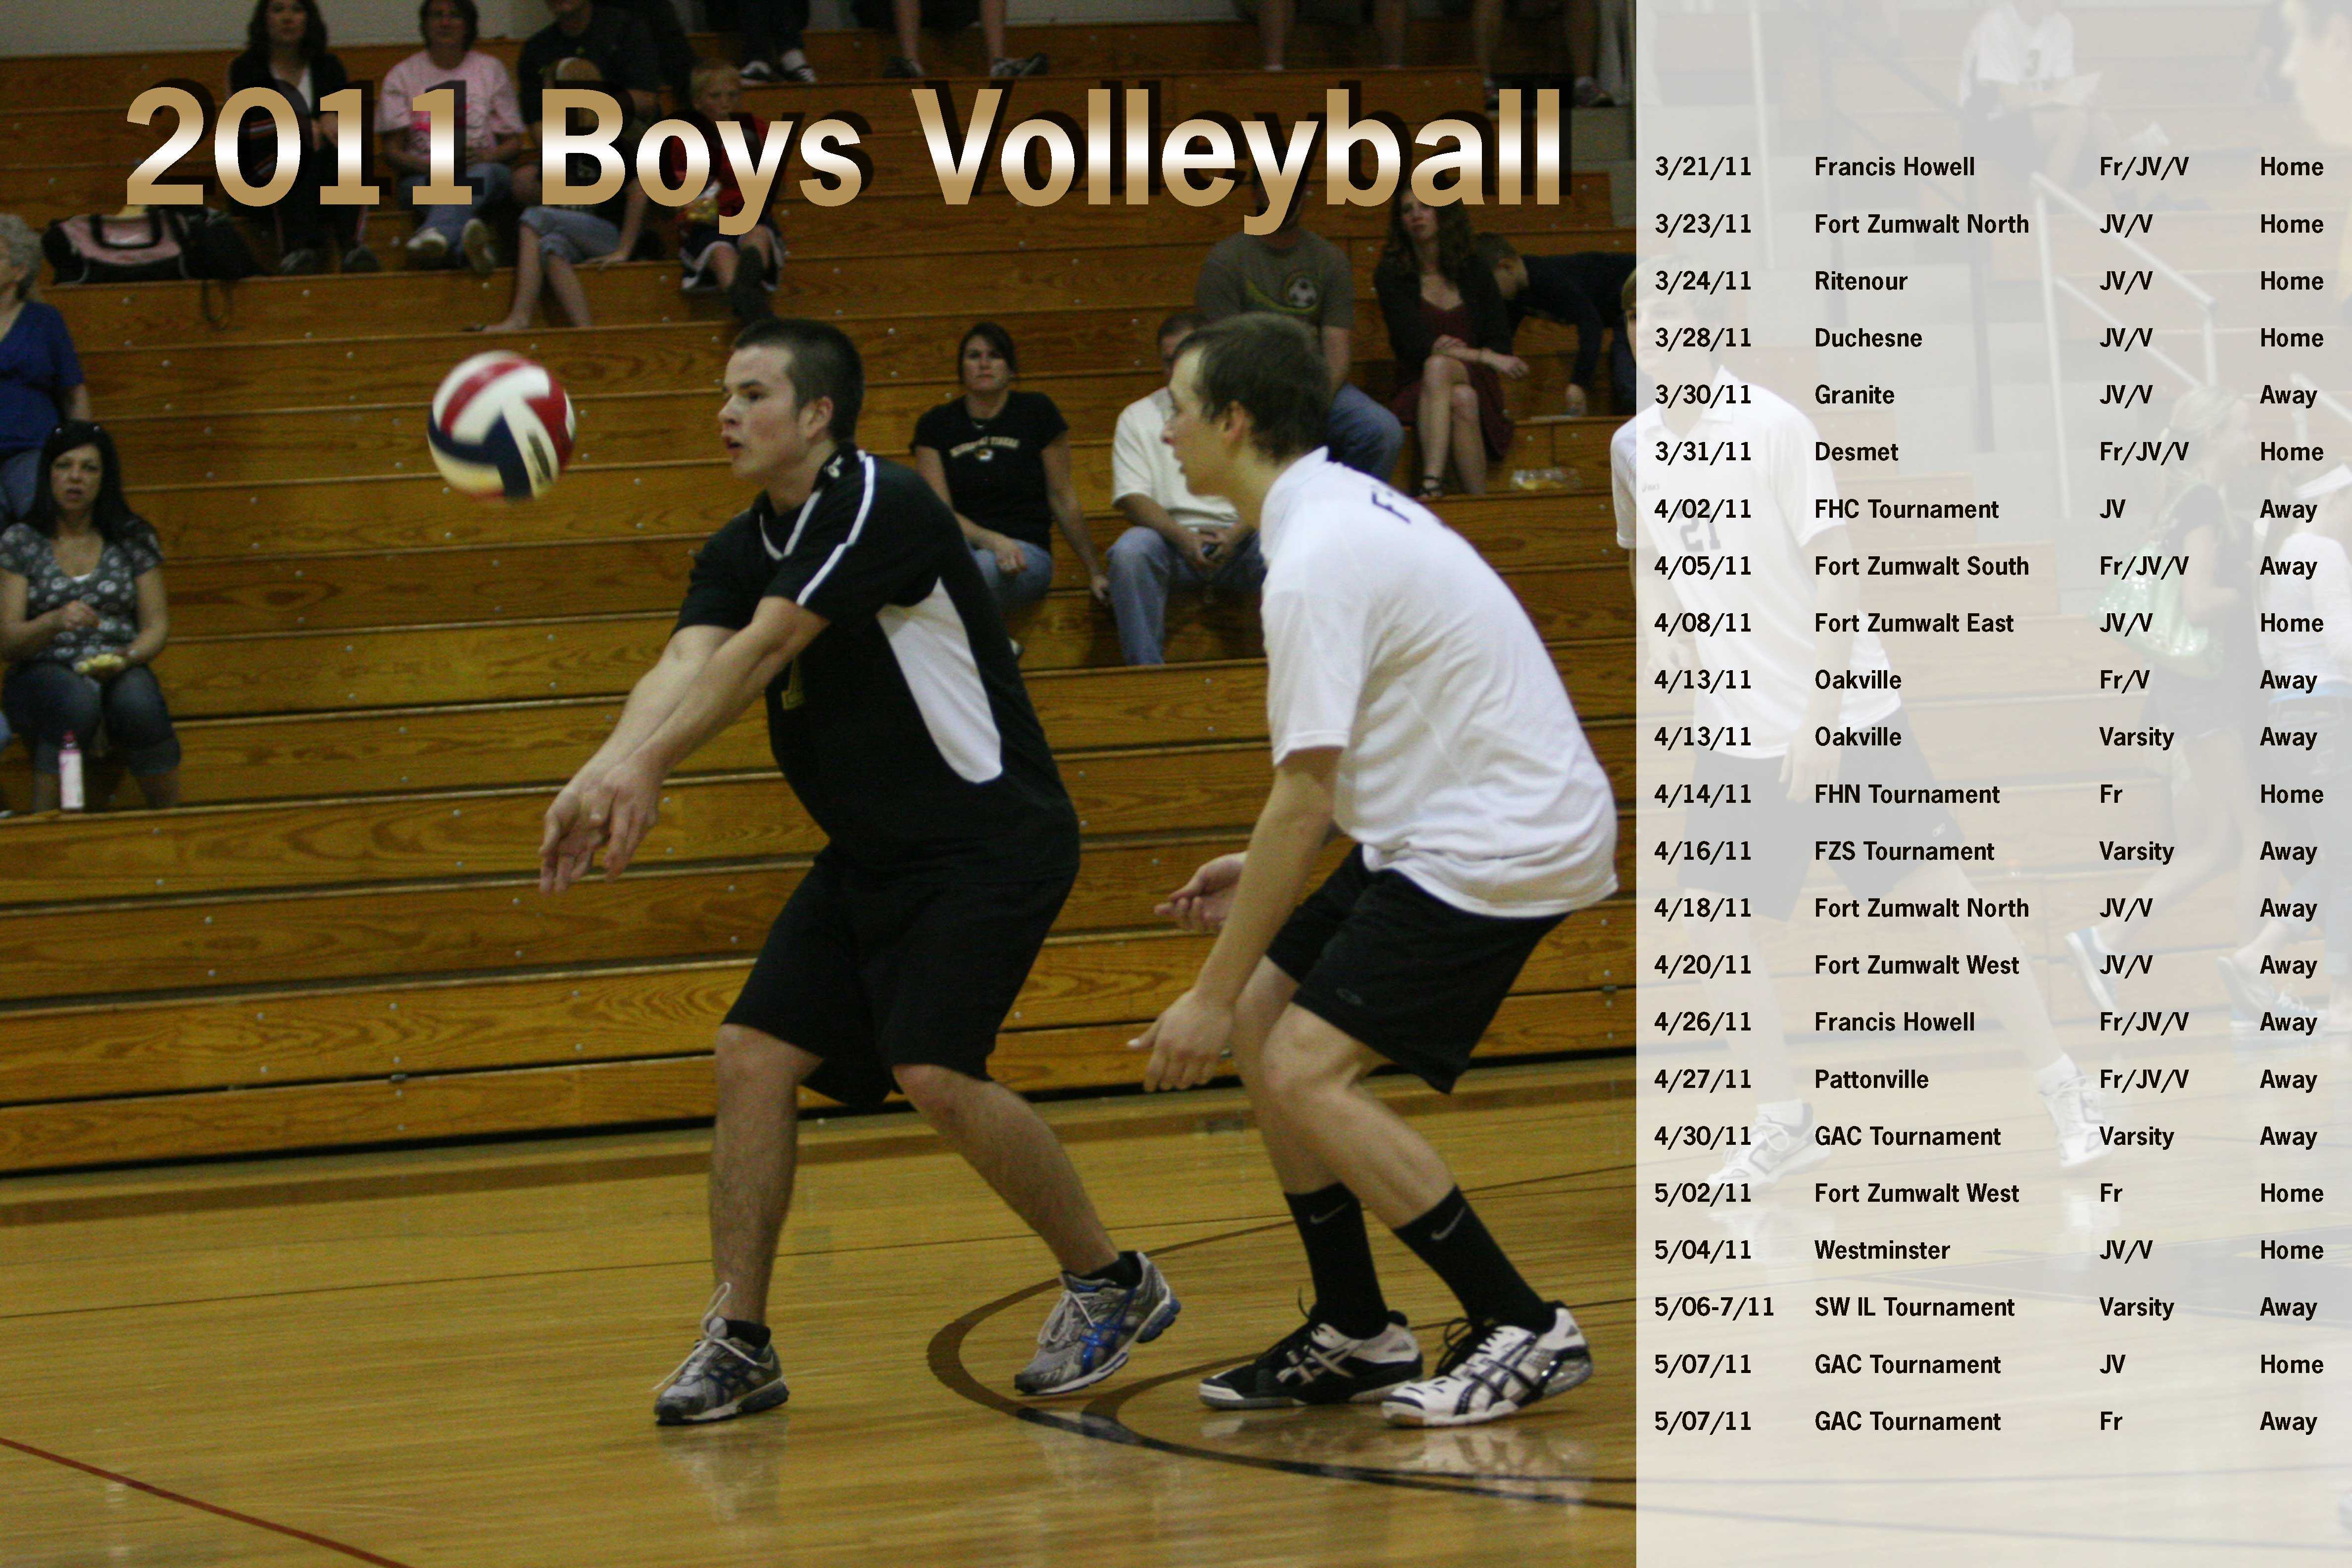 Volleyball Wallpaper Fhntoday